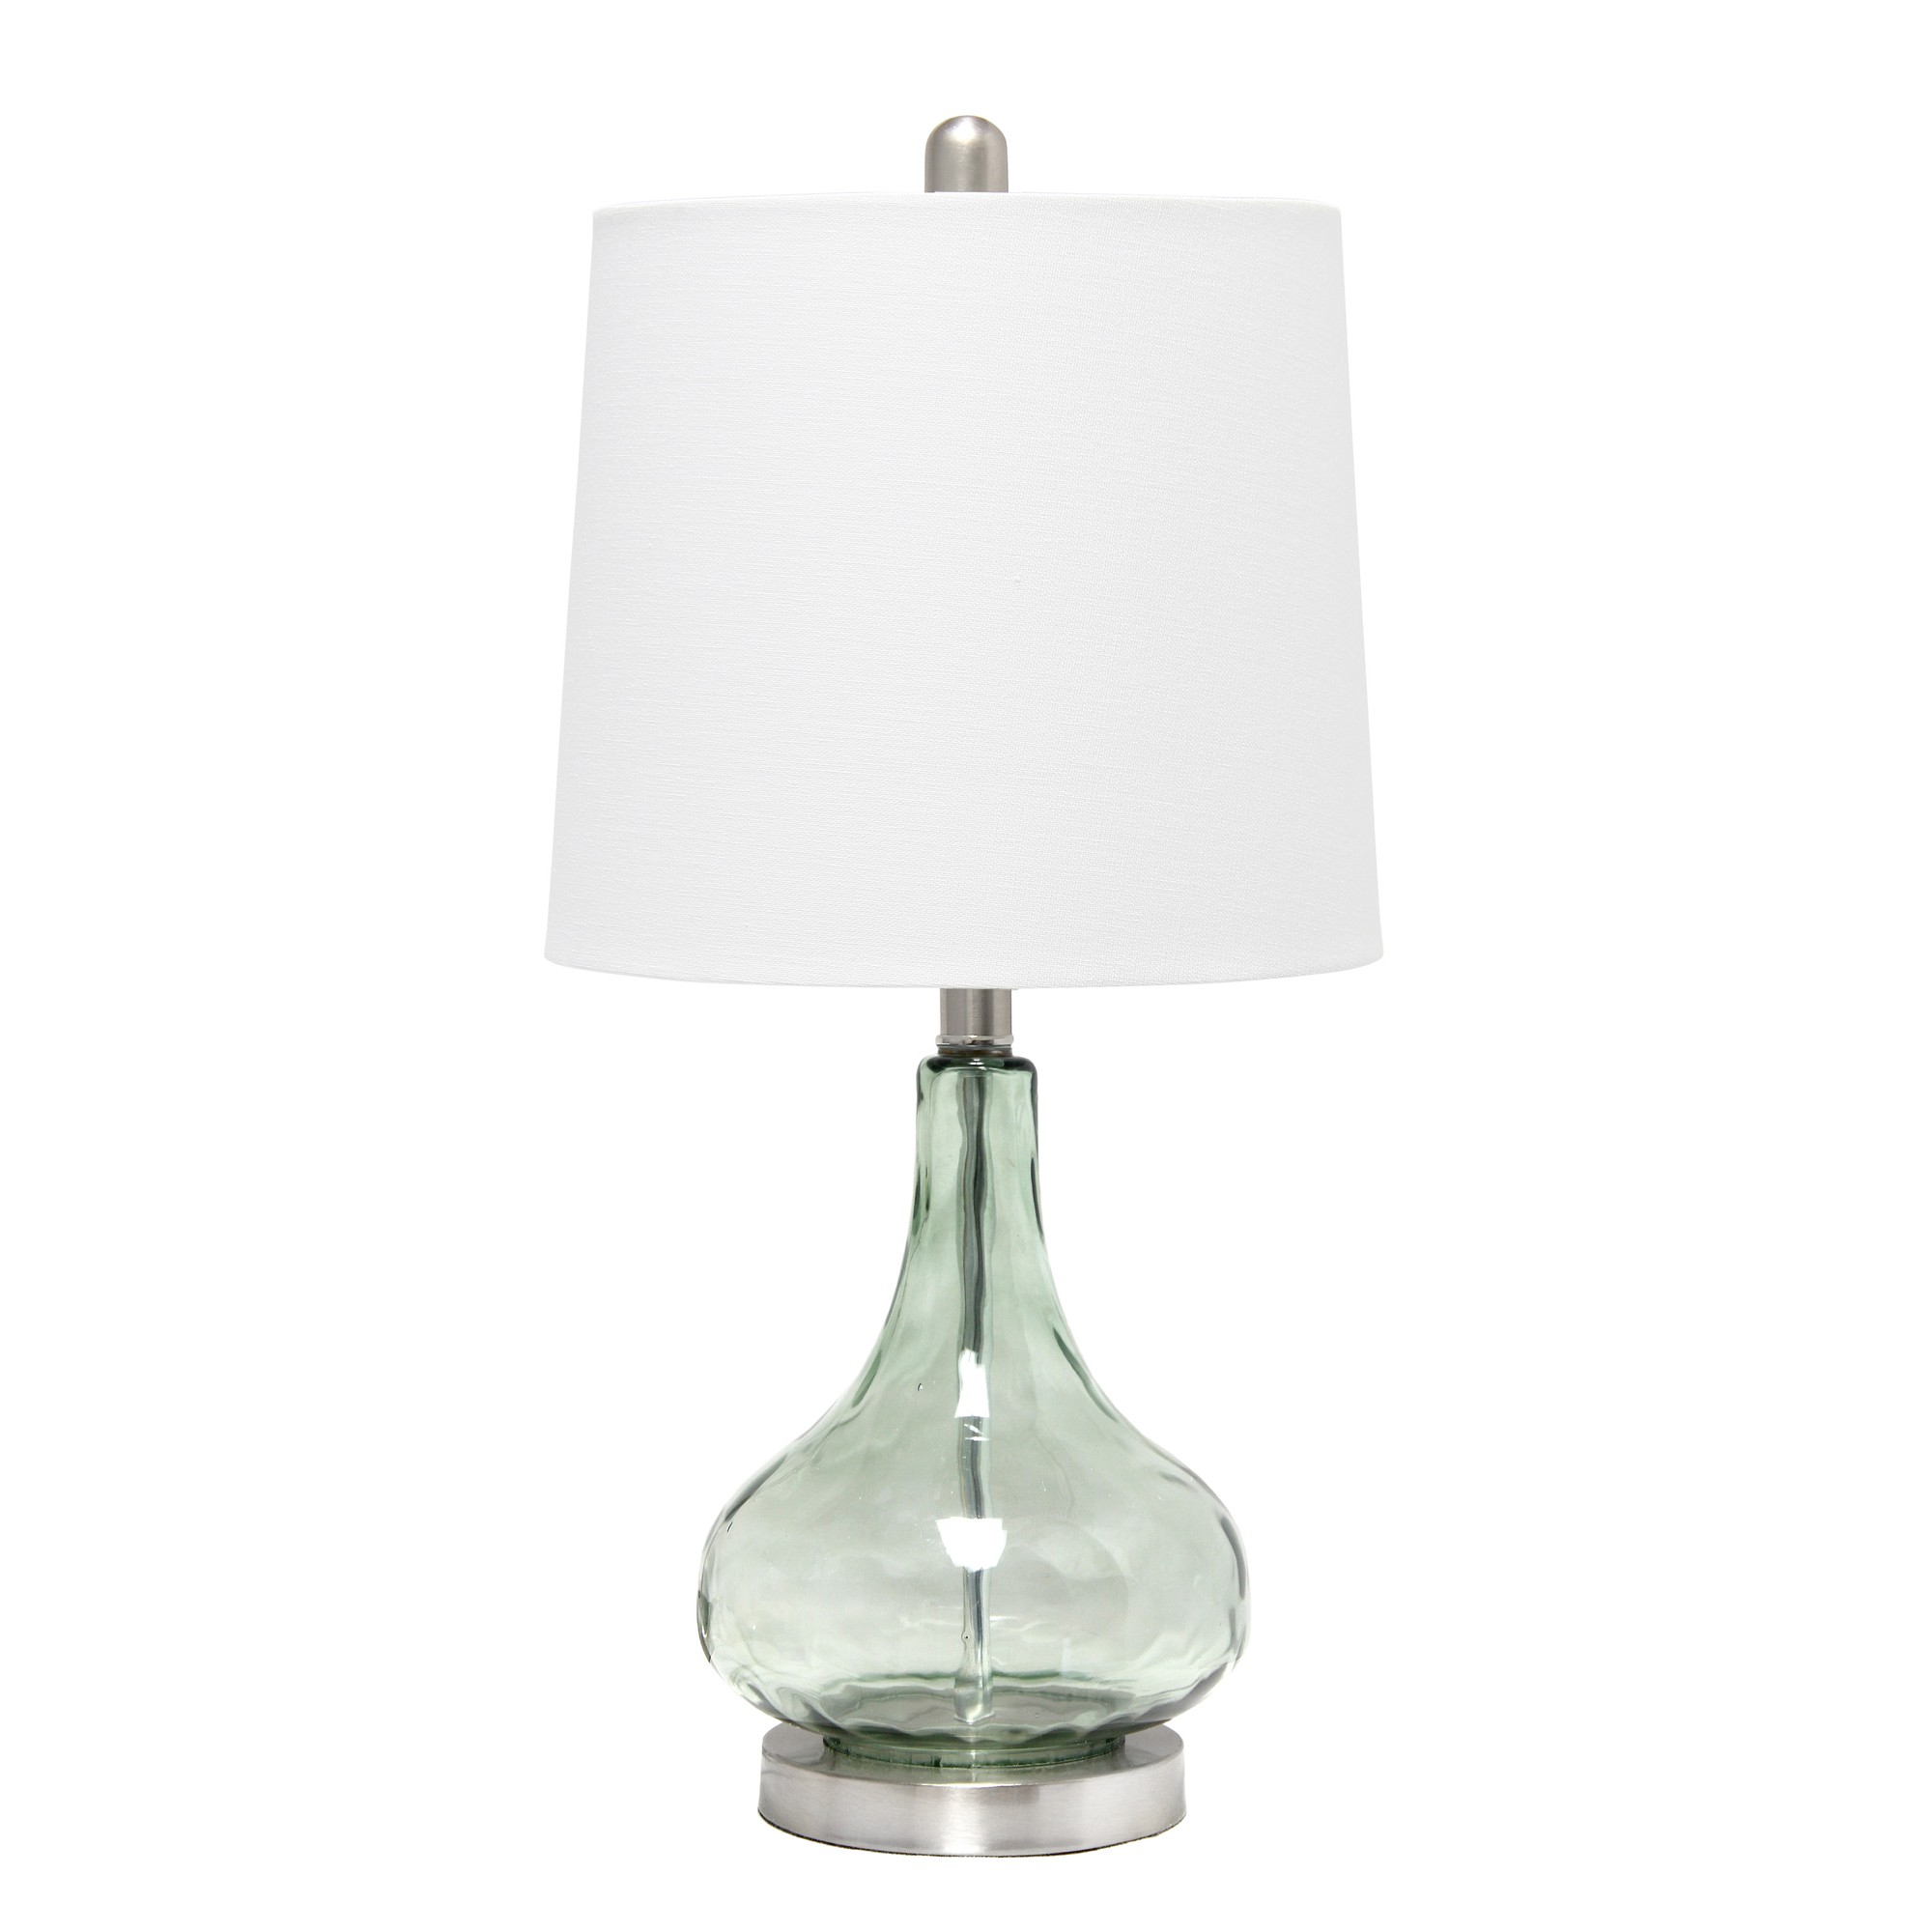 Lalia Home 23.25" Contemporary Rippled Colored Glass Bedside Desk Table Lamp with White Fabric Shade, Green/Gray Sage